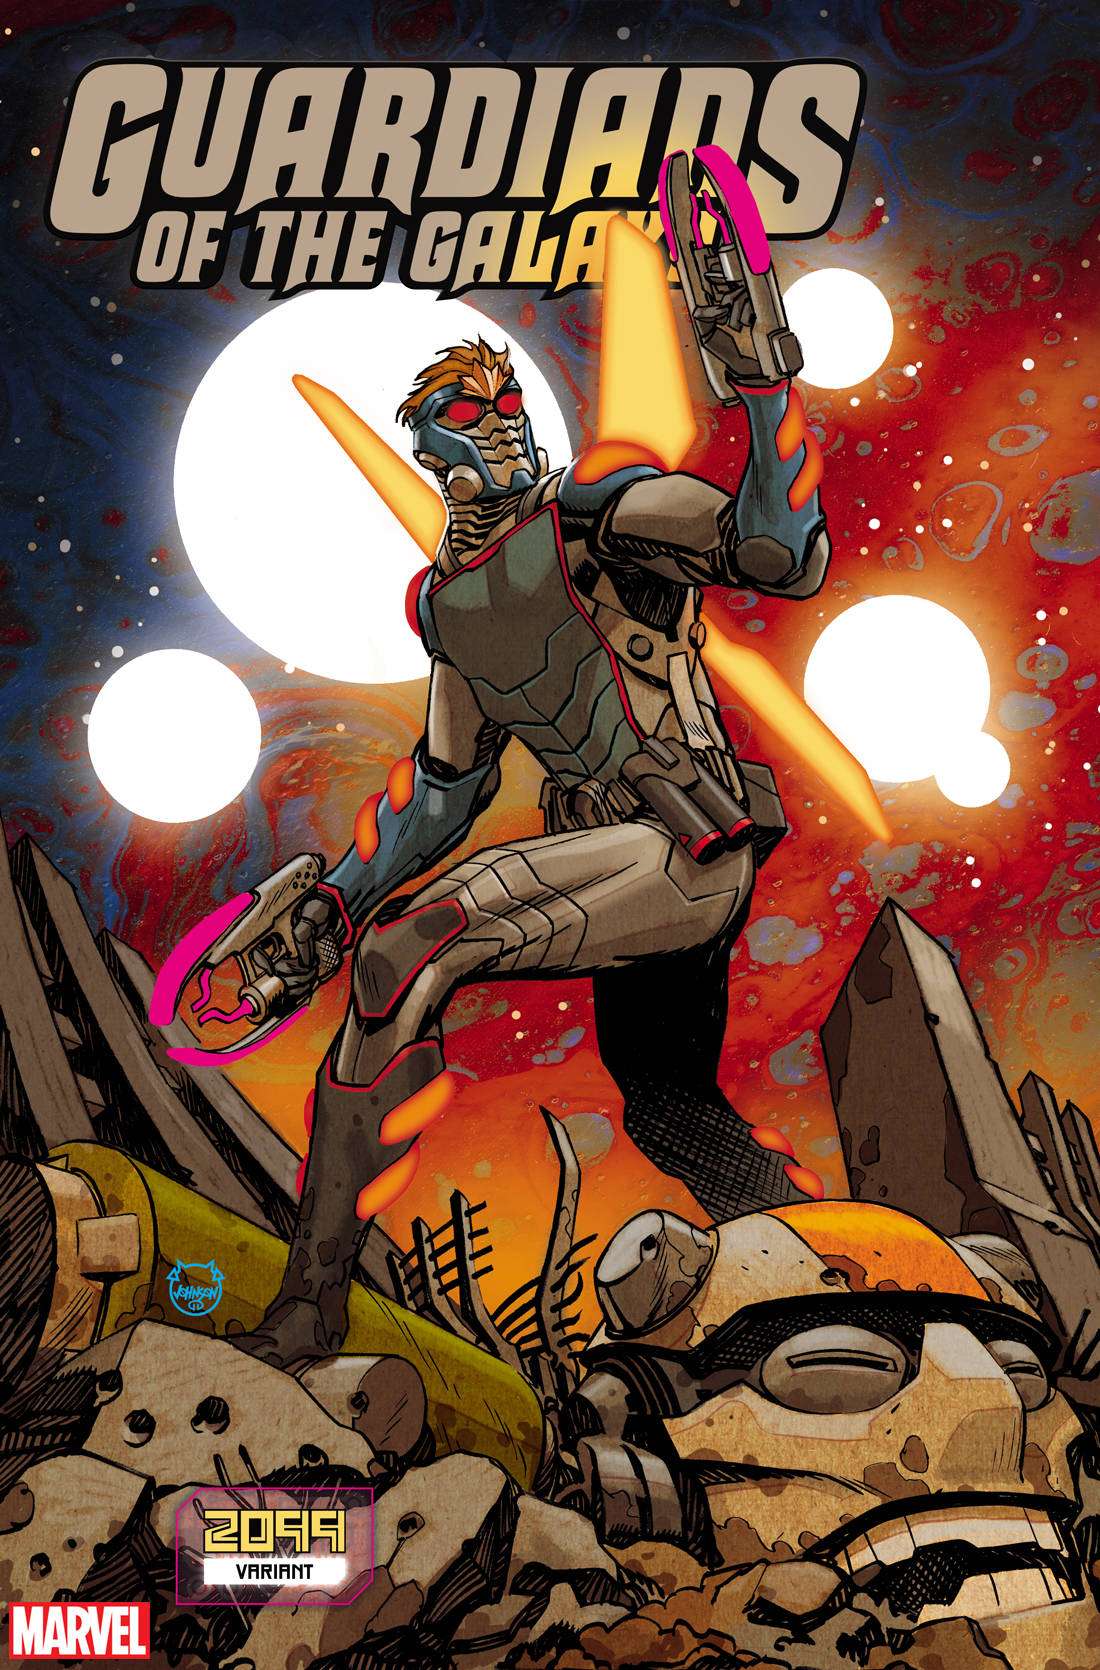 GUARDIANS OF THE GALAXY #11 JOHNSON 2099 VARIANT